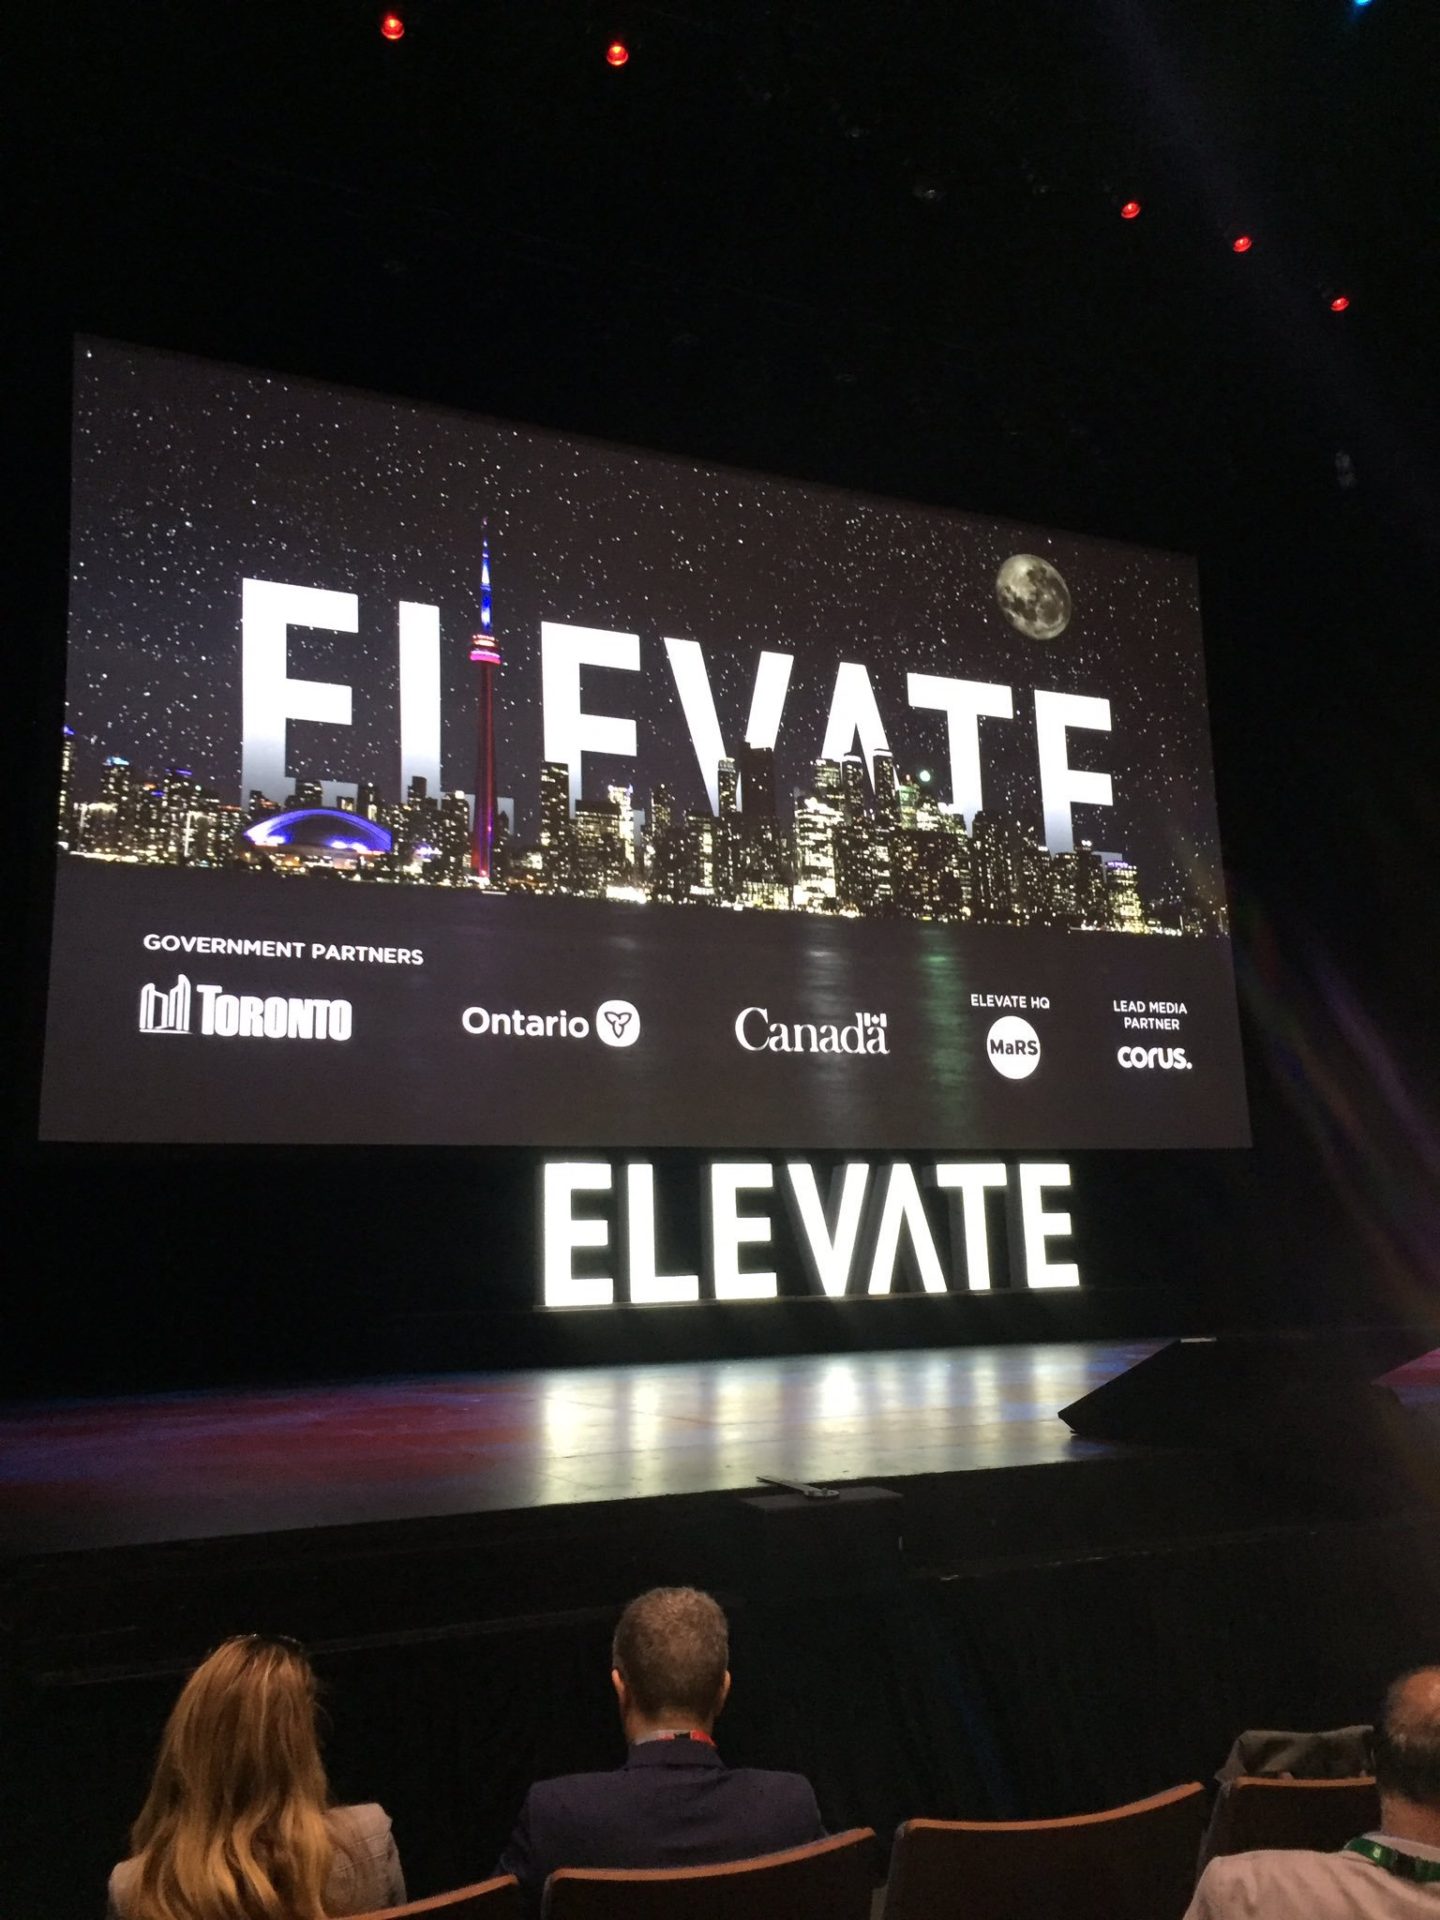 Live Coverage of the Elevate Conference The Toronto Observer